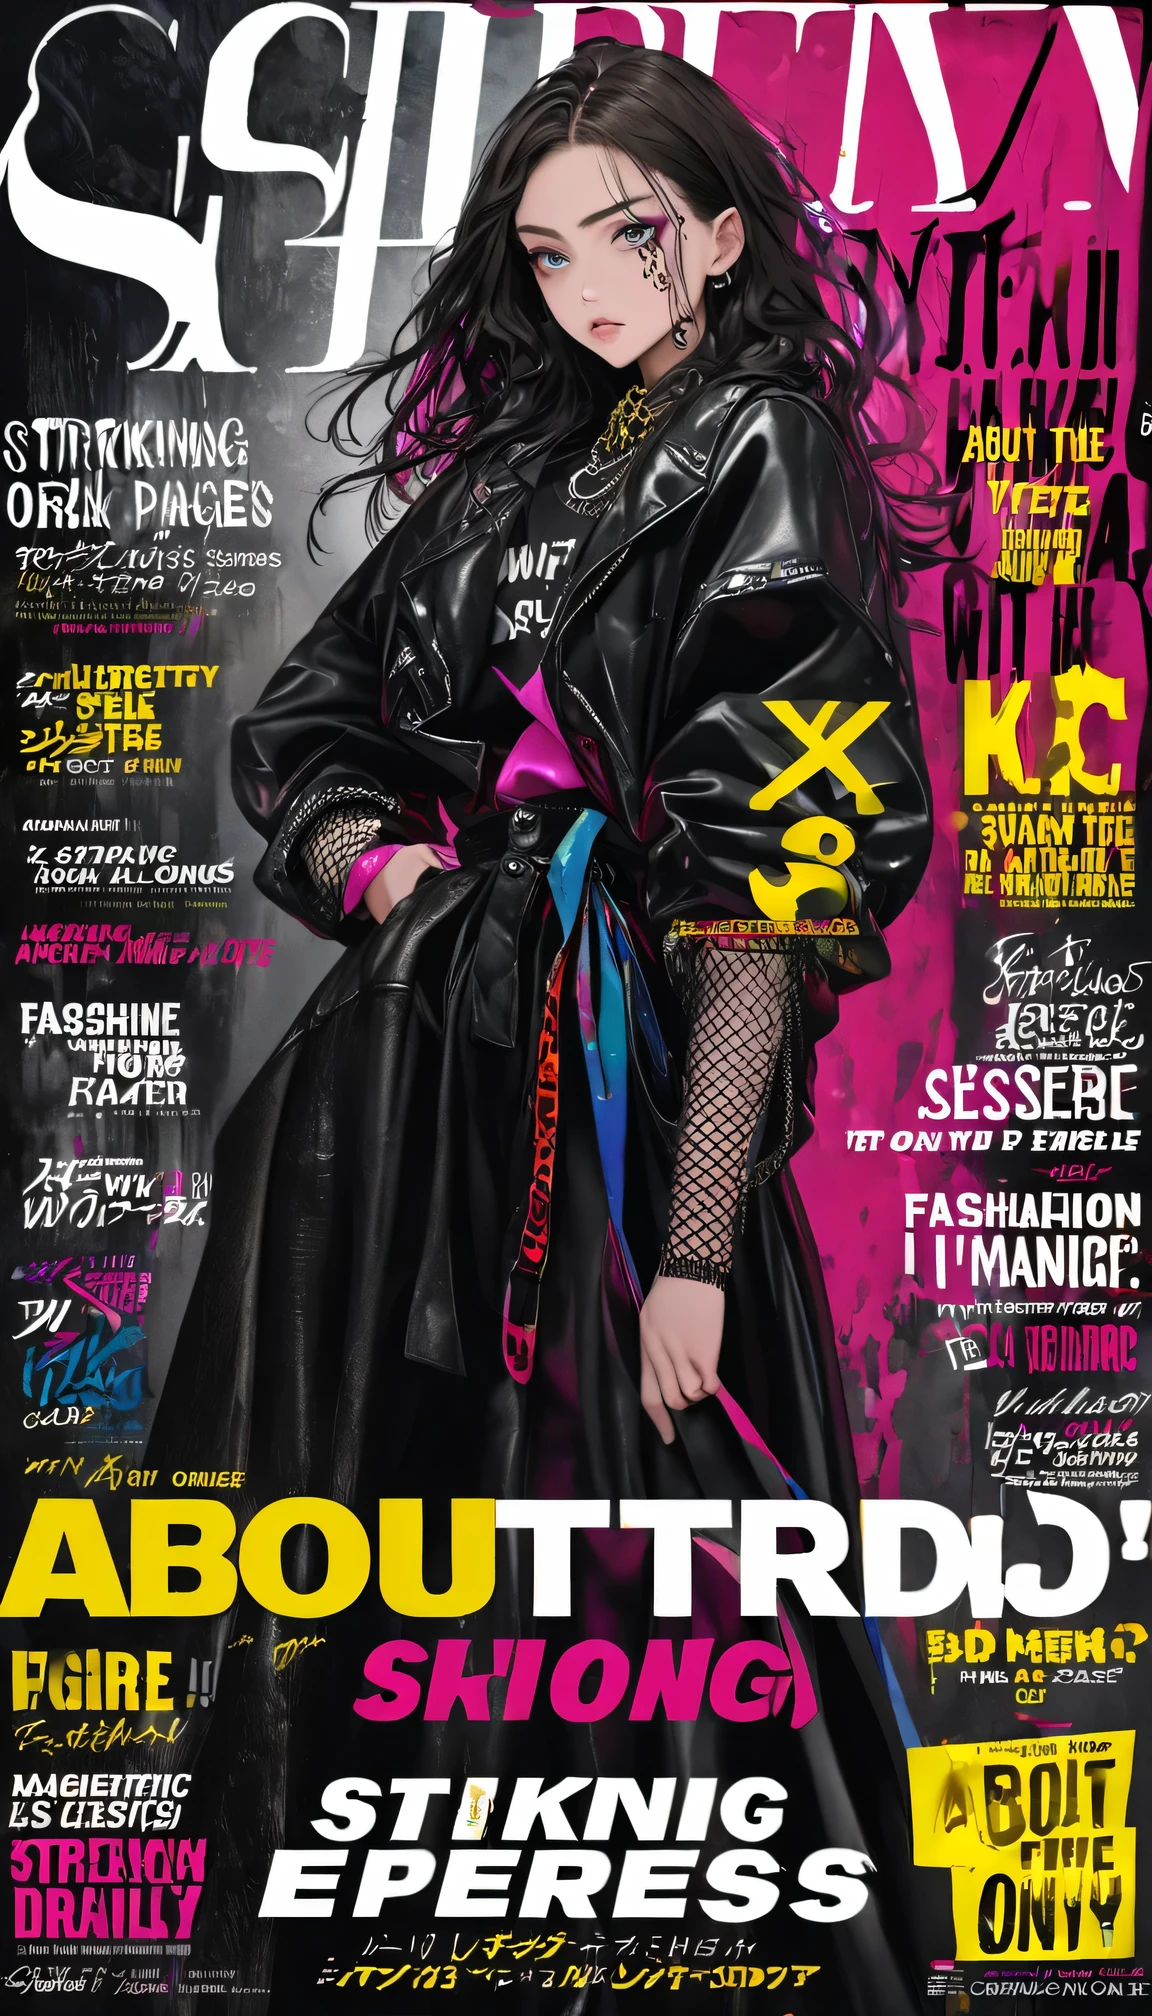 Fashion Magazine cover：A handsome female model, ((((dramatic))), (((Gritty))), (((intense))) film poster featuring a young miss as the central character. She stands confidently in the center of the poster, wearing a fashionable and edgy Full set of equipment, with a determined Express on her face. The background is dark and Gritty, with a sense of danger and intensity. The text is big胆的 and striking, with a catchy tagline that adds to the overall feeling of drama and excitement. The color palette is mainly dark with splashes of Full of energy colors, giving the poster a Dynamic and visually striking appearance,vertical painting (Magazine:1.3), (cover-style:1.3), Fashionable, miss, Full of energy, Full set of equipment, posture, front, colorful, Dynamic, background, element, confident, Express, Keep, statement, Accessories, majestic, coiled, about, touch, Scenes, text, cover, big胆的, striking, title, fashionable, font, catchy, title, big, striking, modern, trend, focus, Fashion,